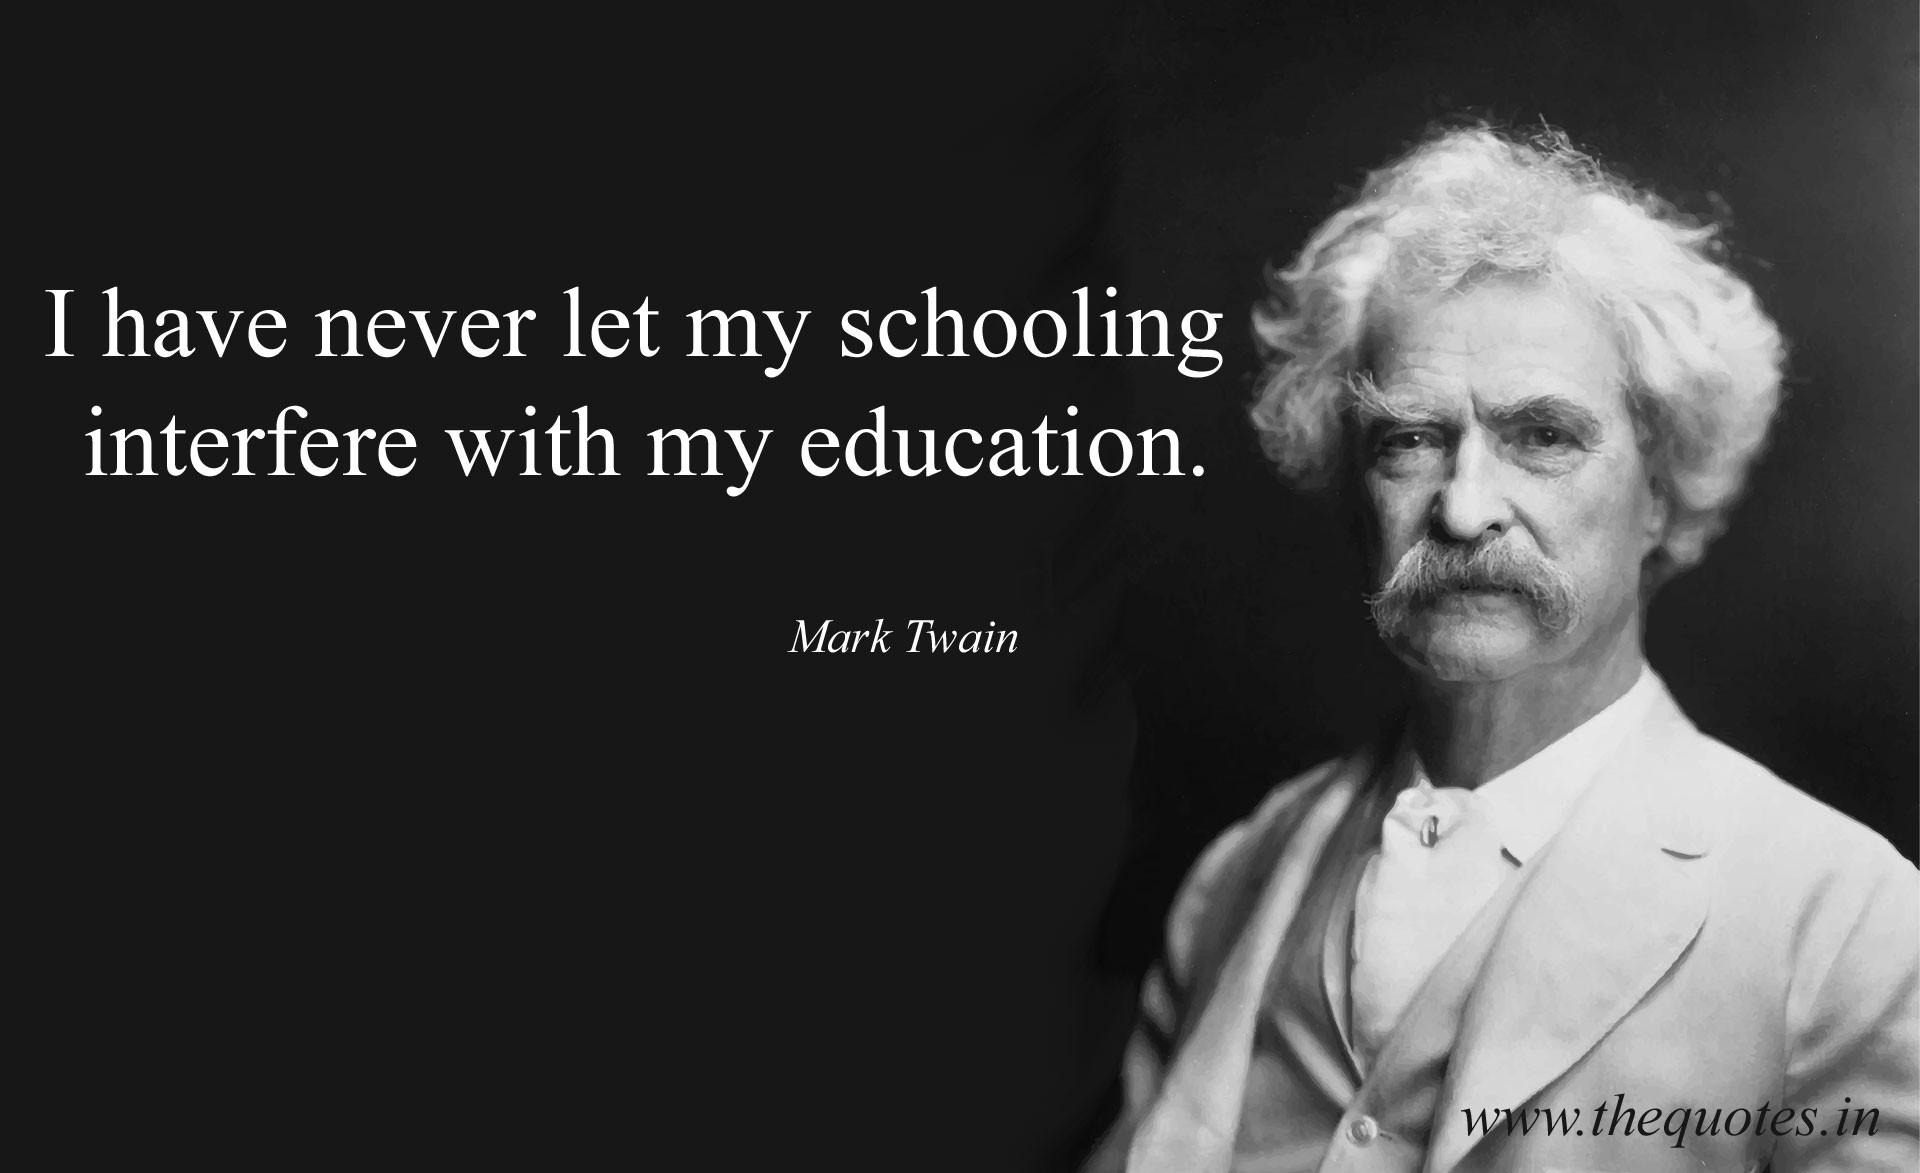 Mark Twain Education Quote
 Mark Twain Education Quote QUOTES BY PEOPLE